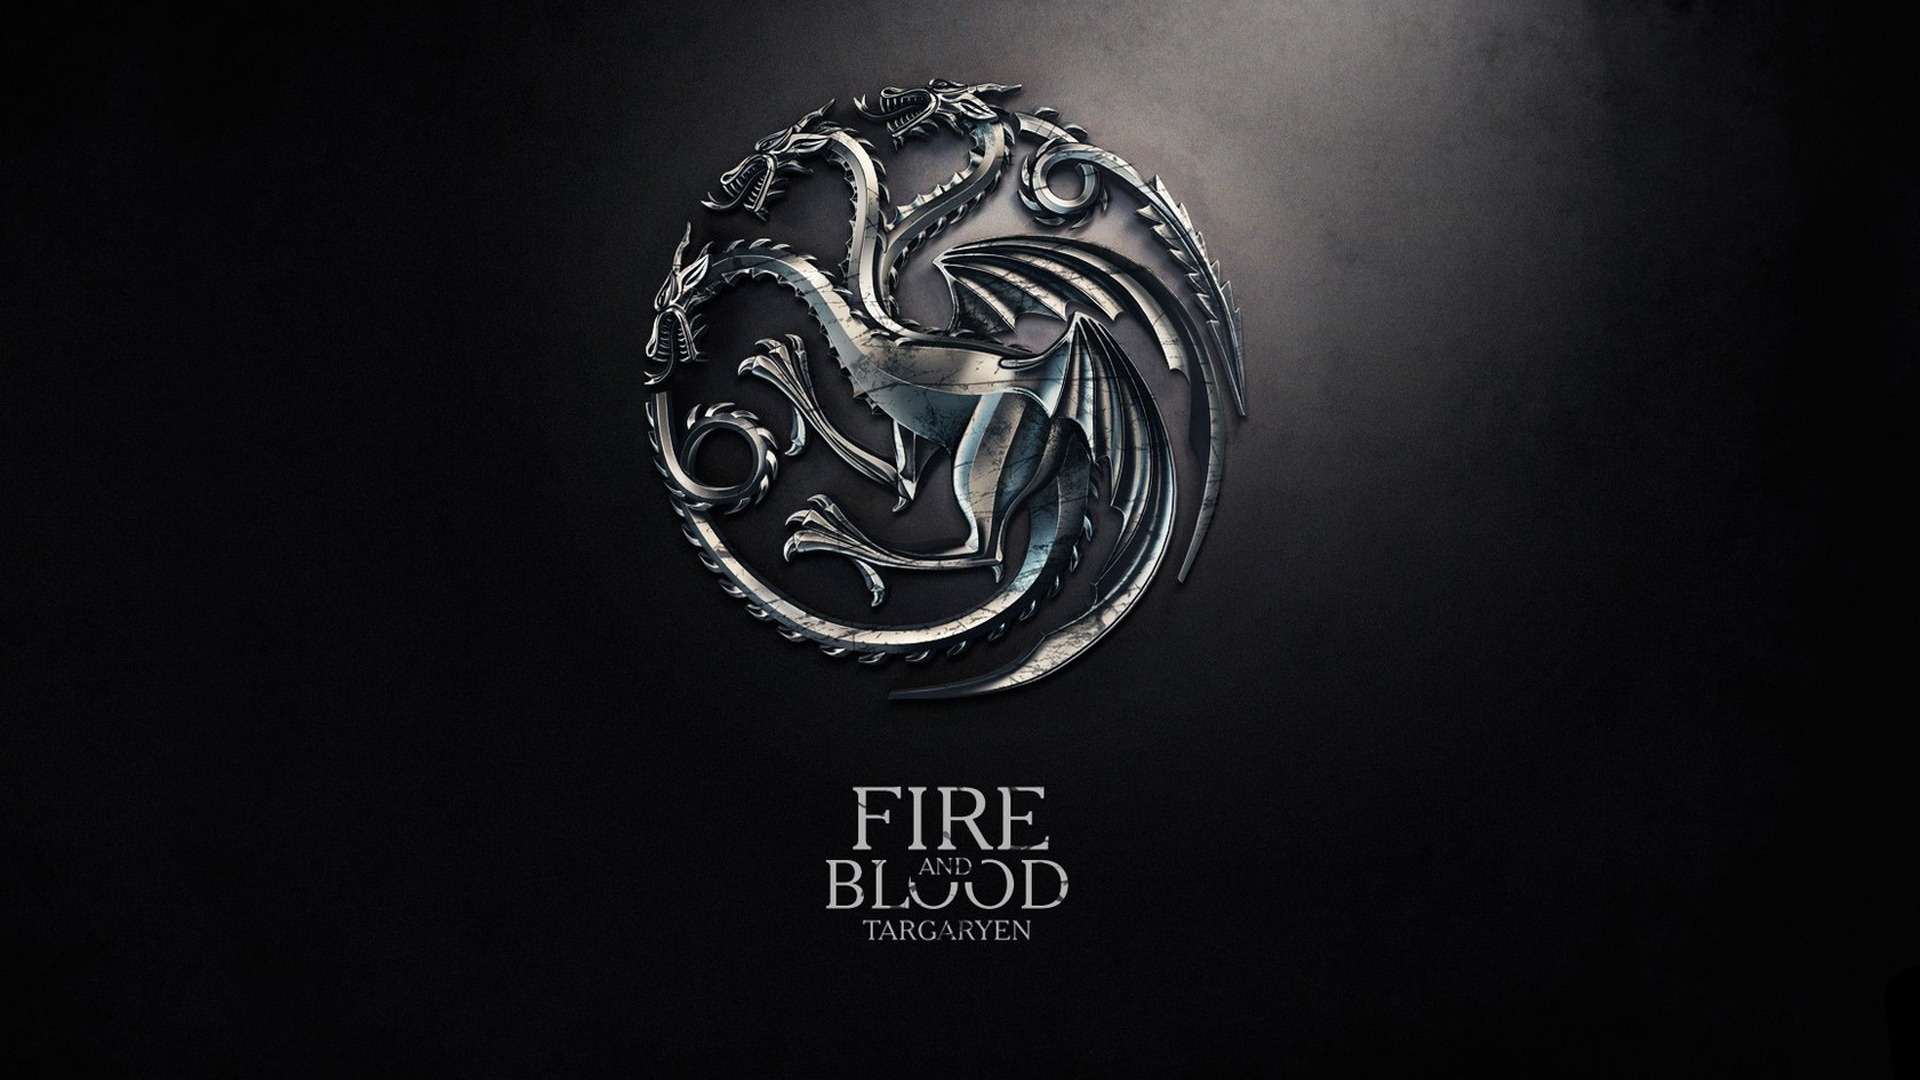 Fire and Blood for 1920 x 1080 HDTV 1080p resolution